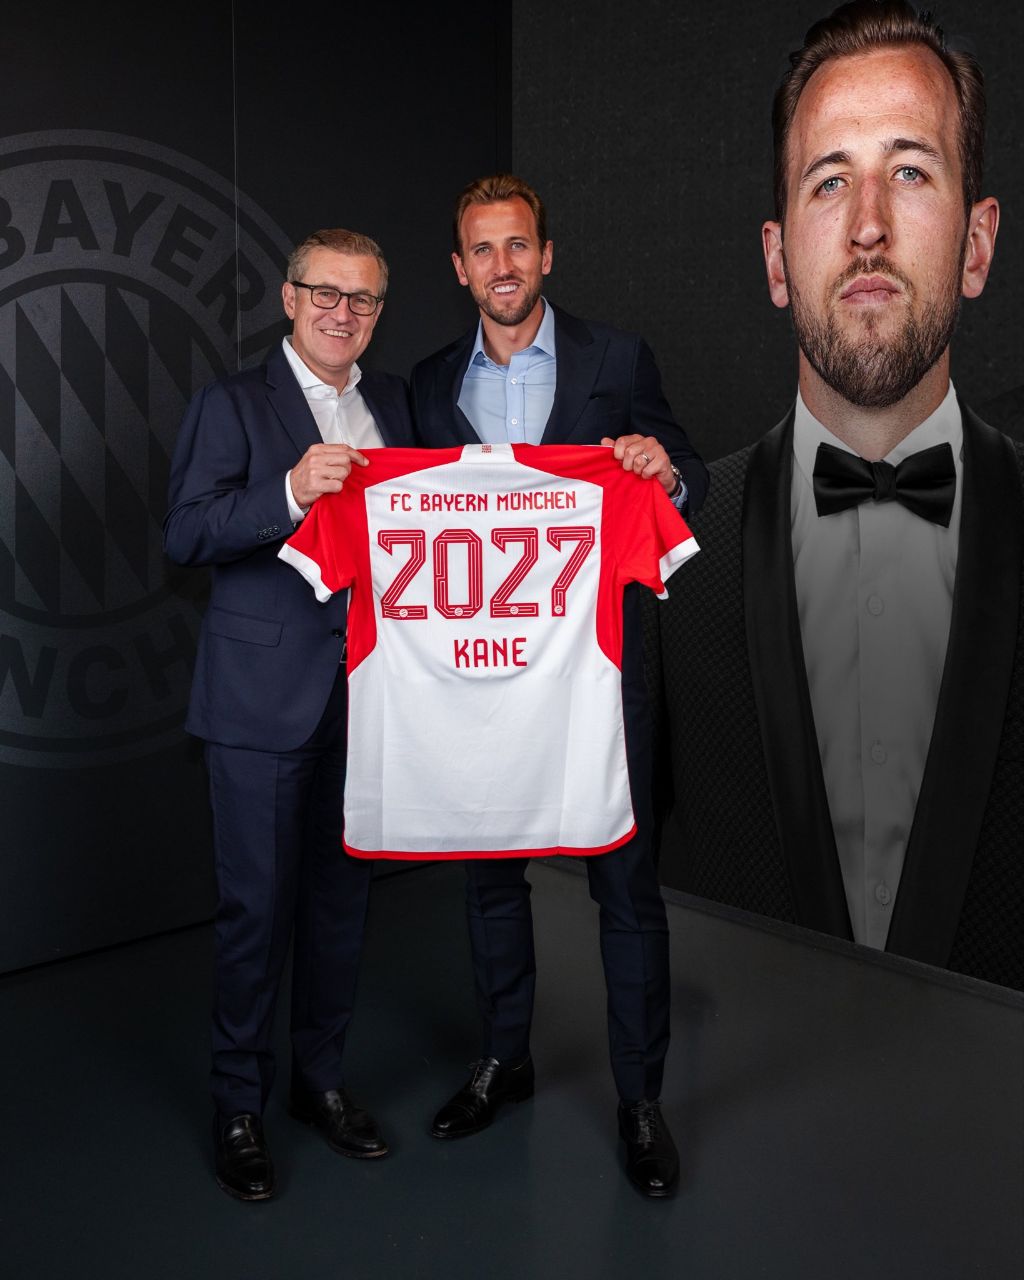 Officially: Harry Kane is a player for Bayern Munich